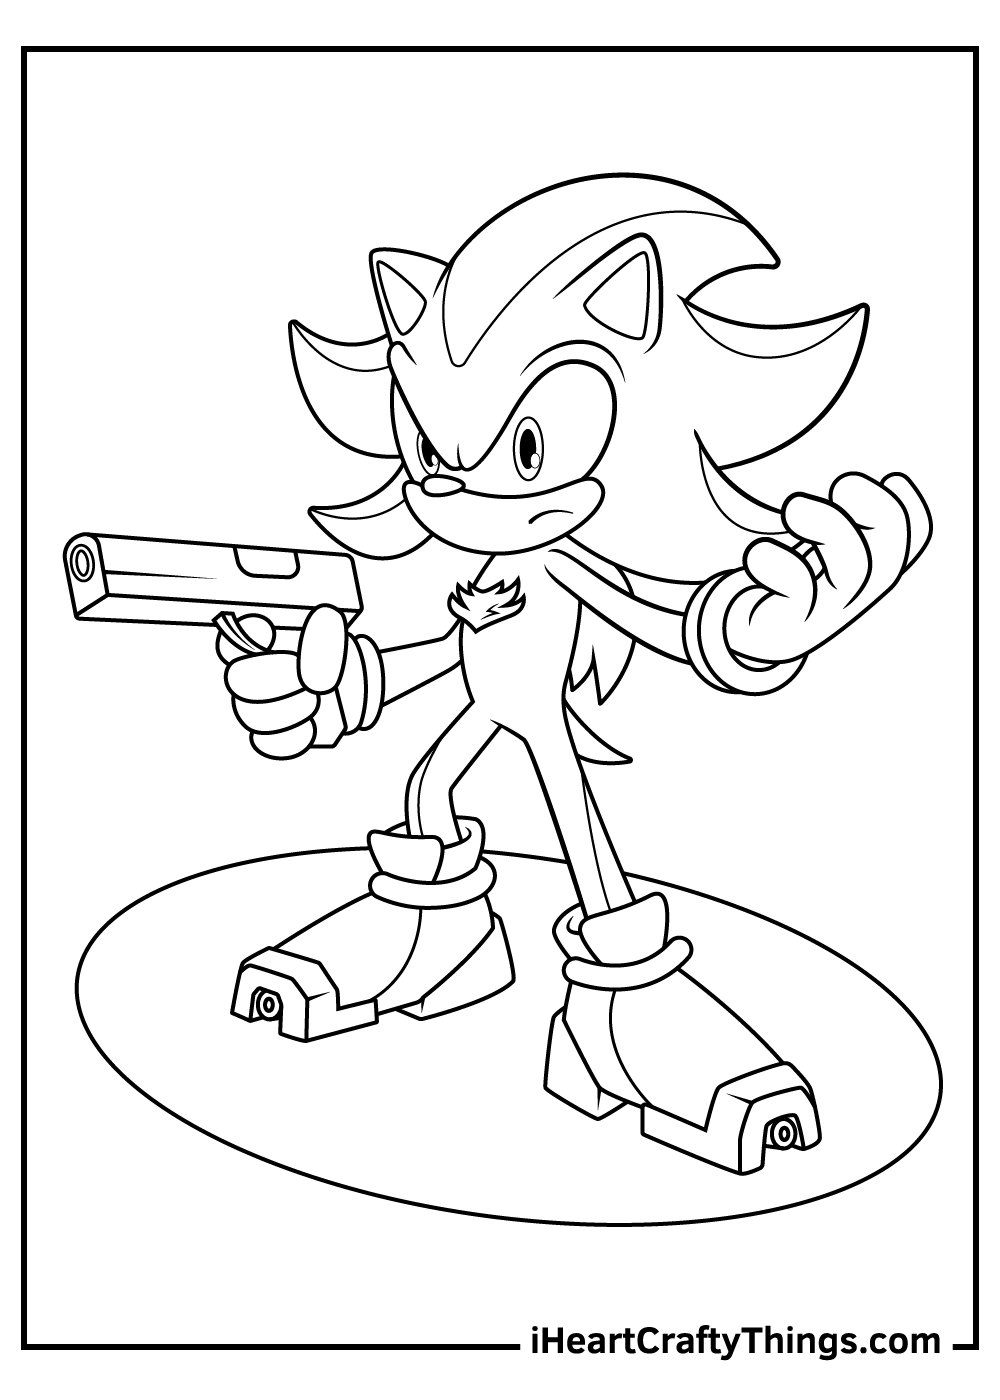 classic shadow the hedgehog coloring pages